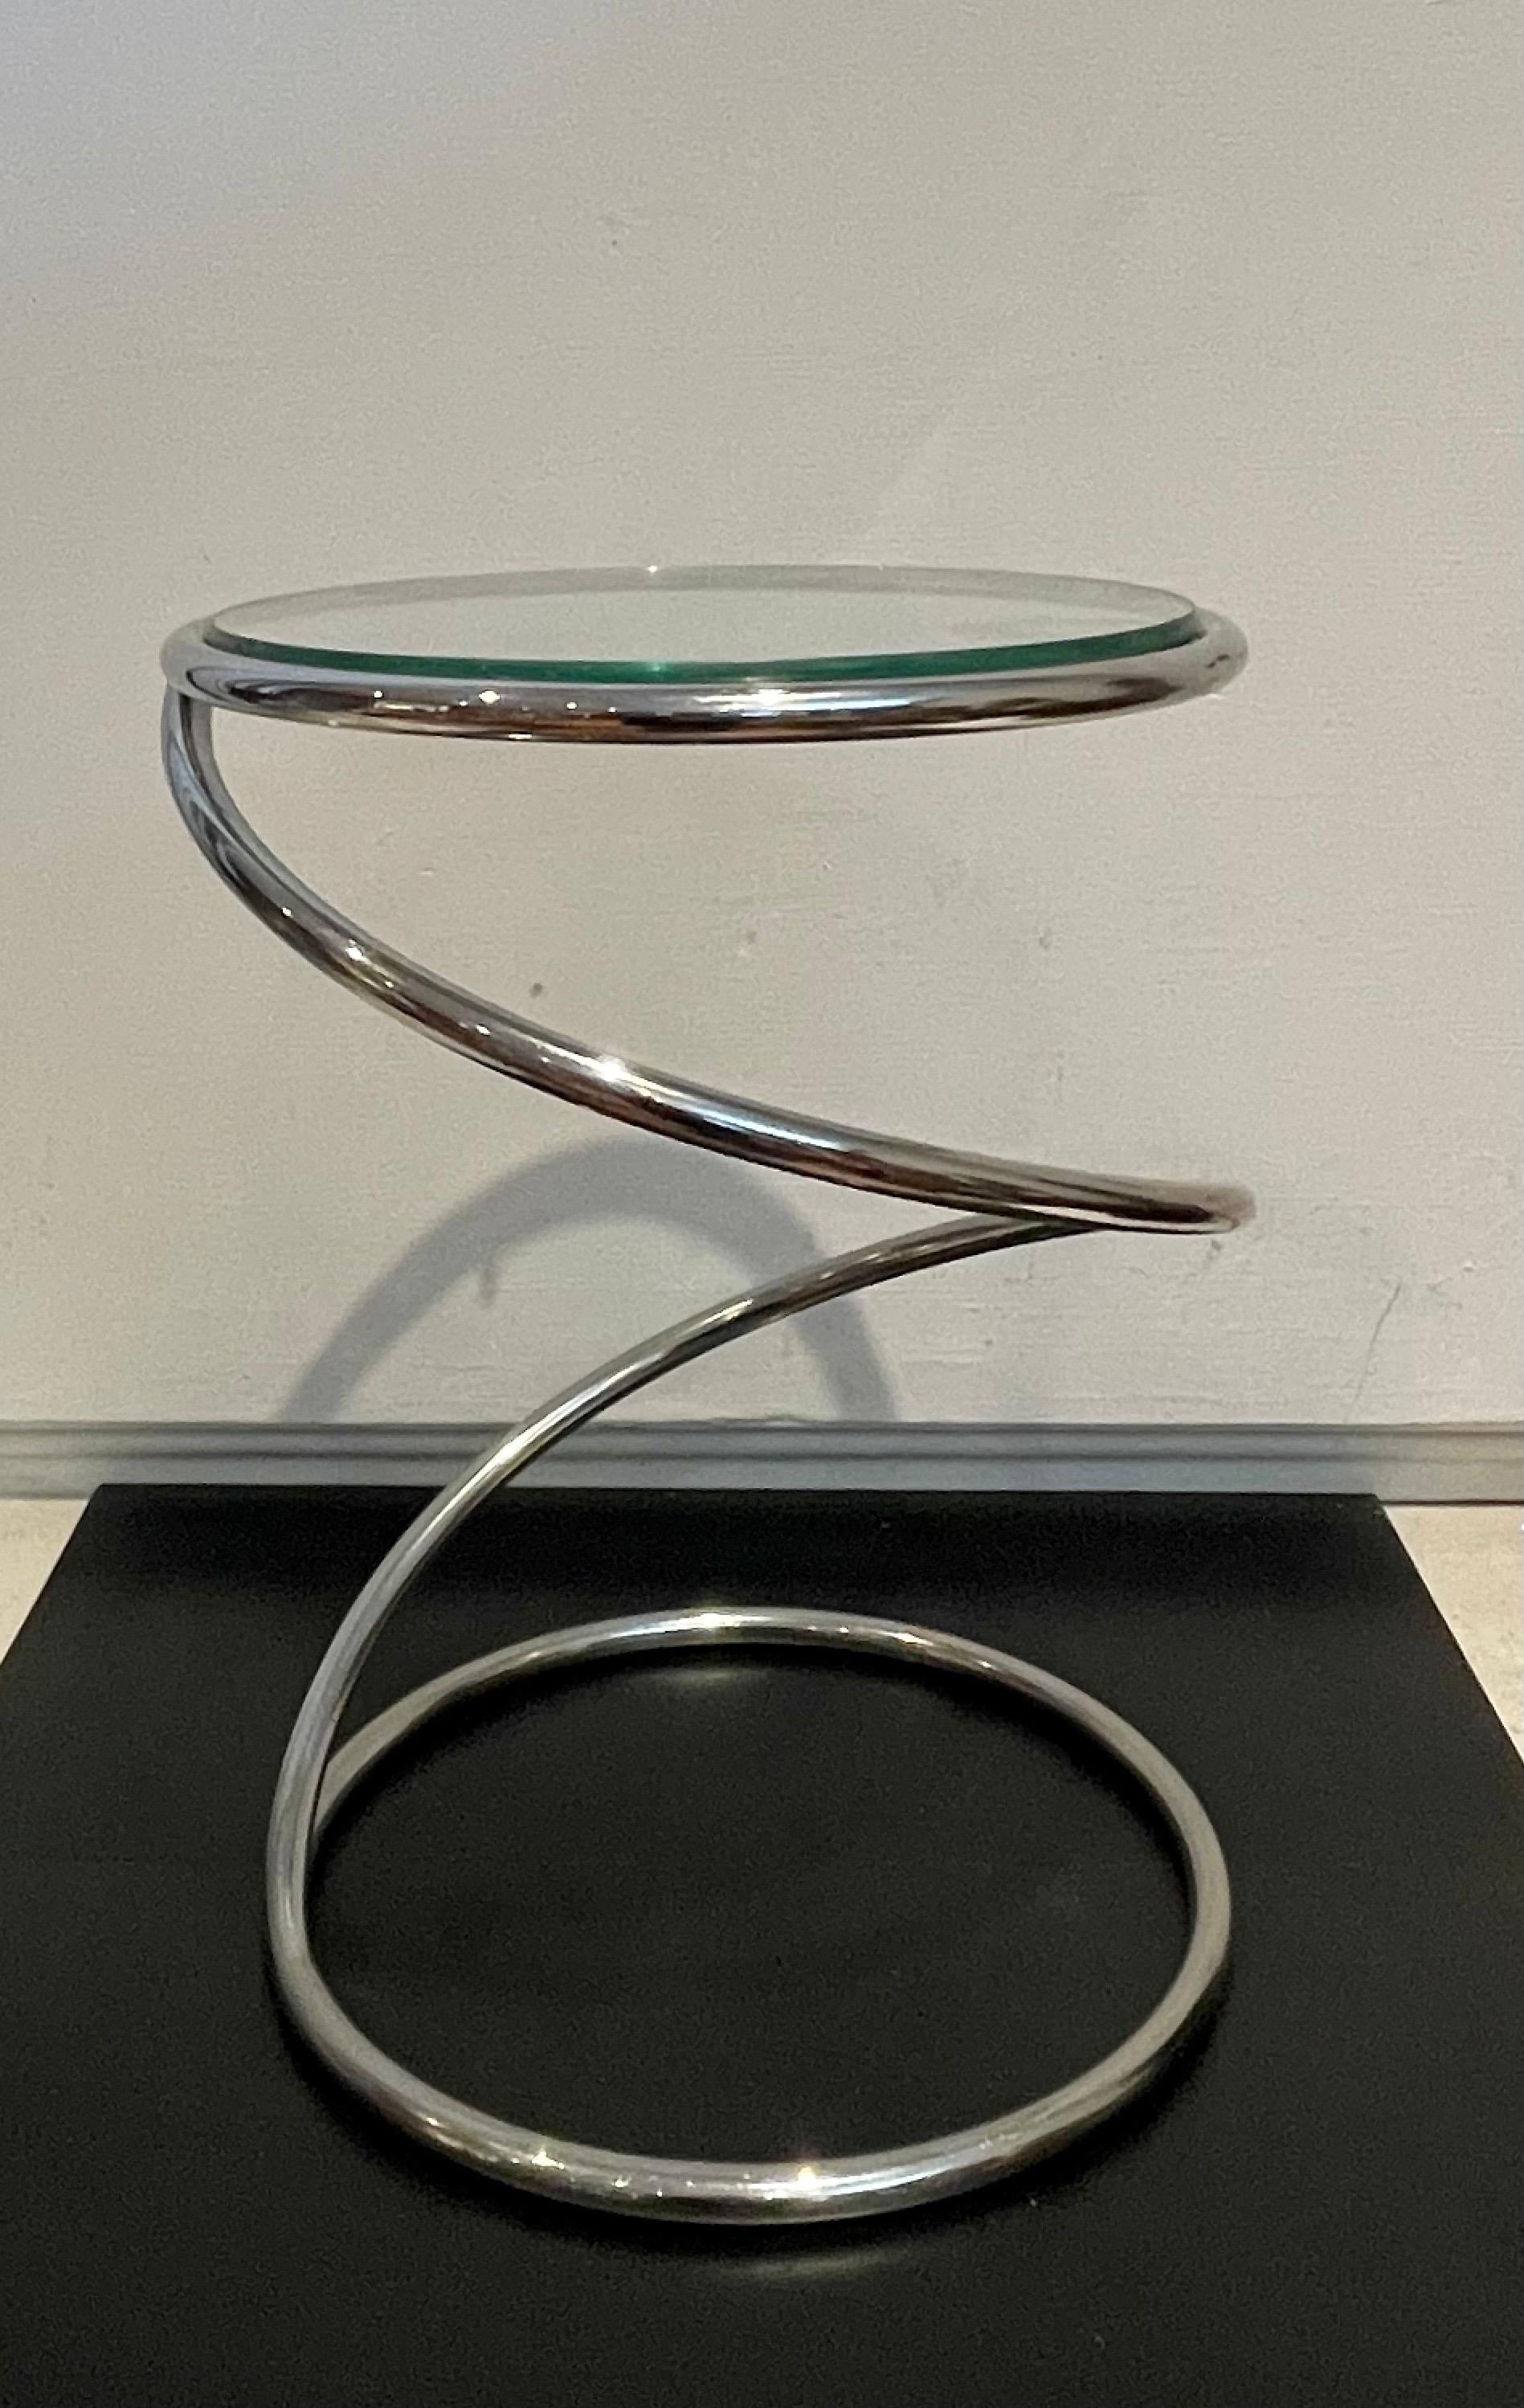 Simple elegant single cocktail table designed by Leon Rosen for Pace furniture, in polished chrome and glass.